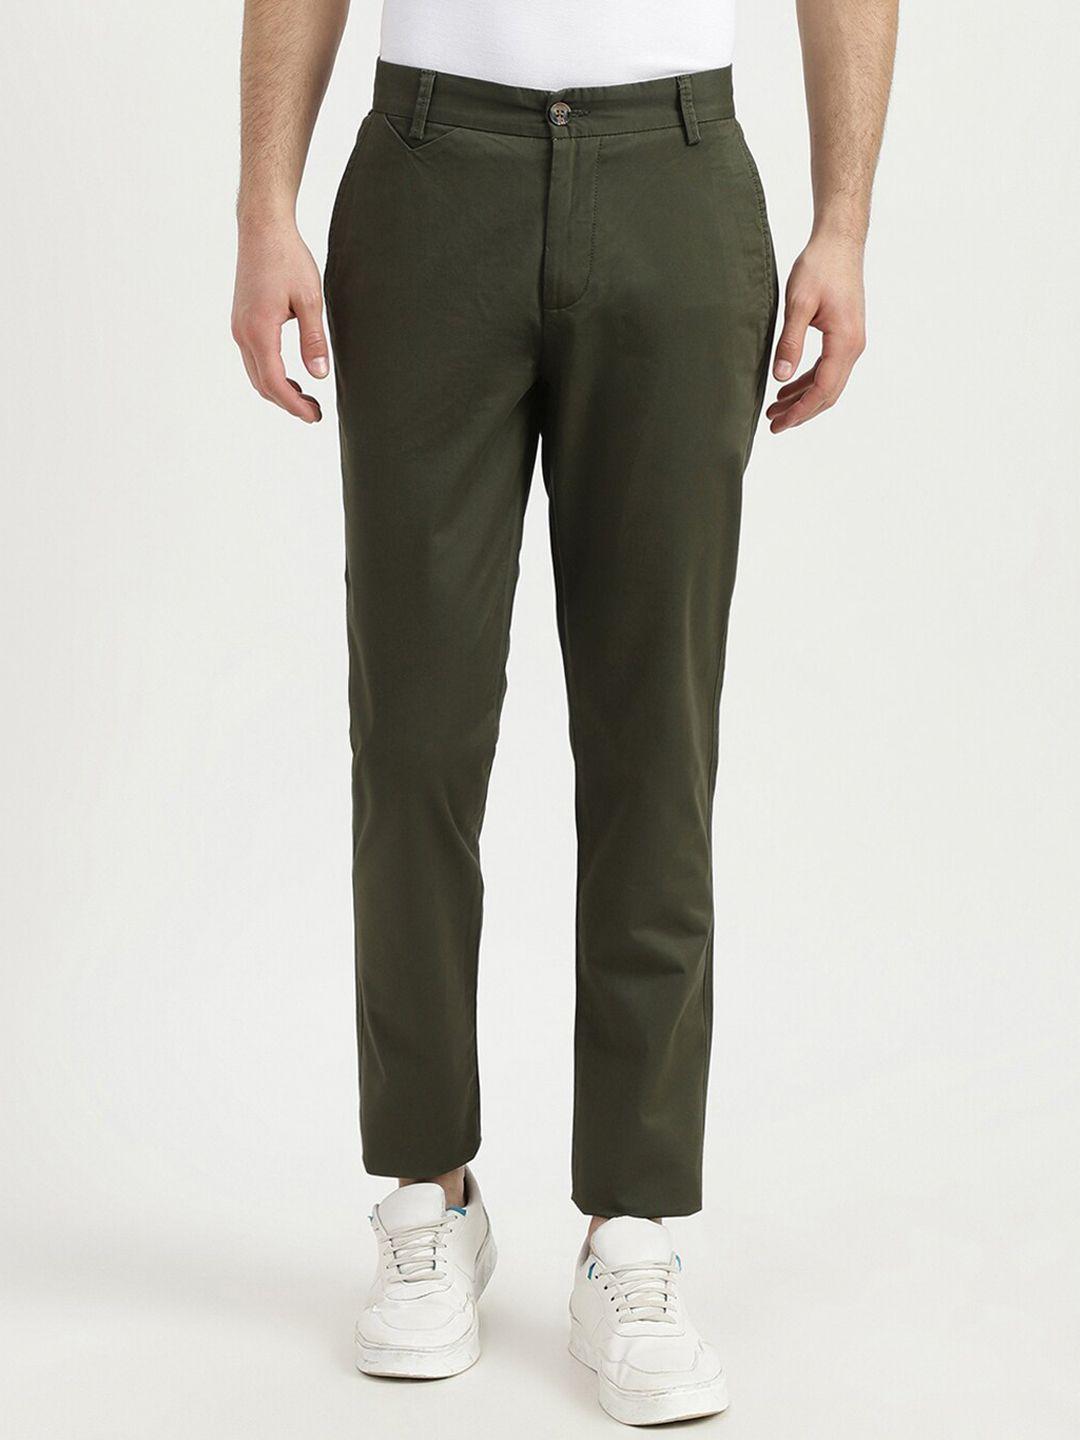 united-colors-of-benetton-men-olive-green-cotton-solid-slim-fit-trousers